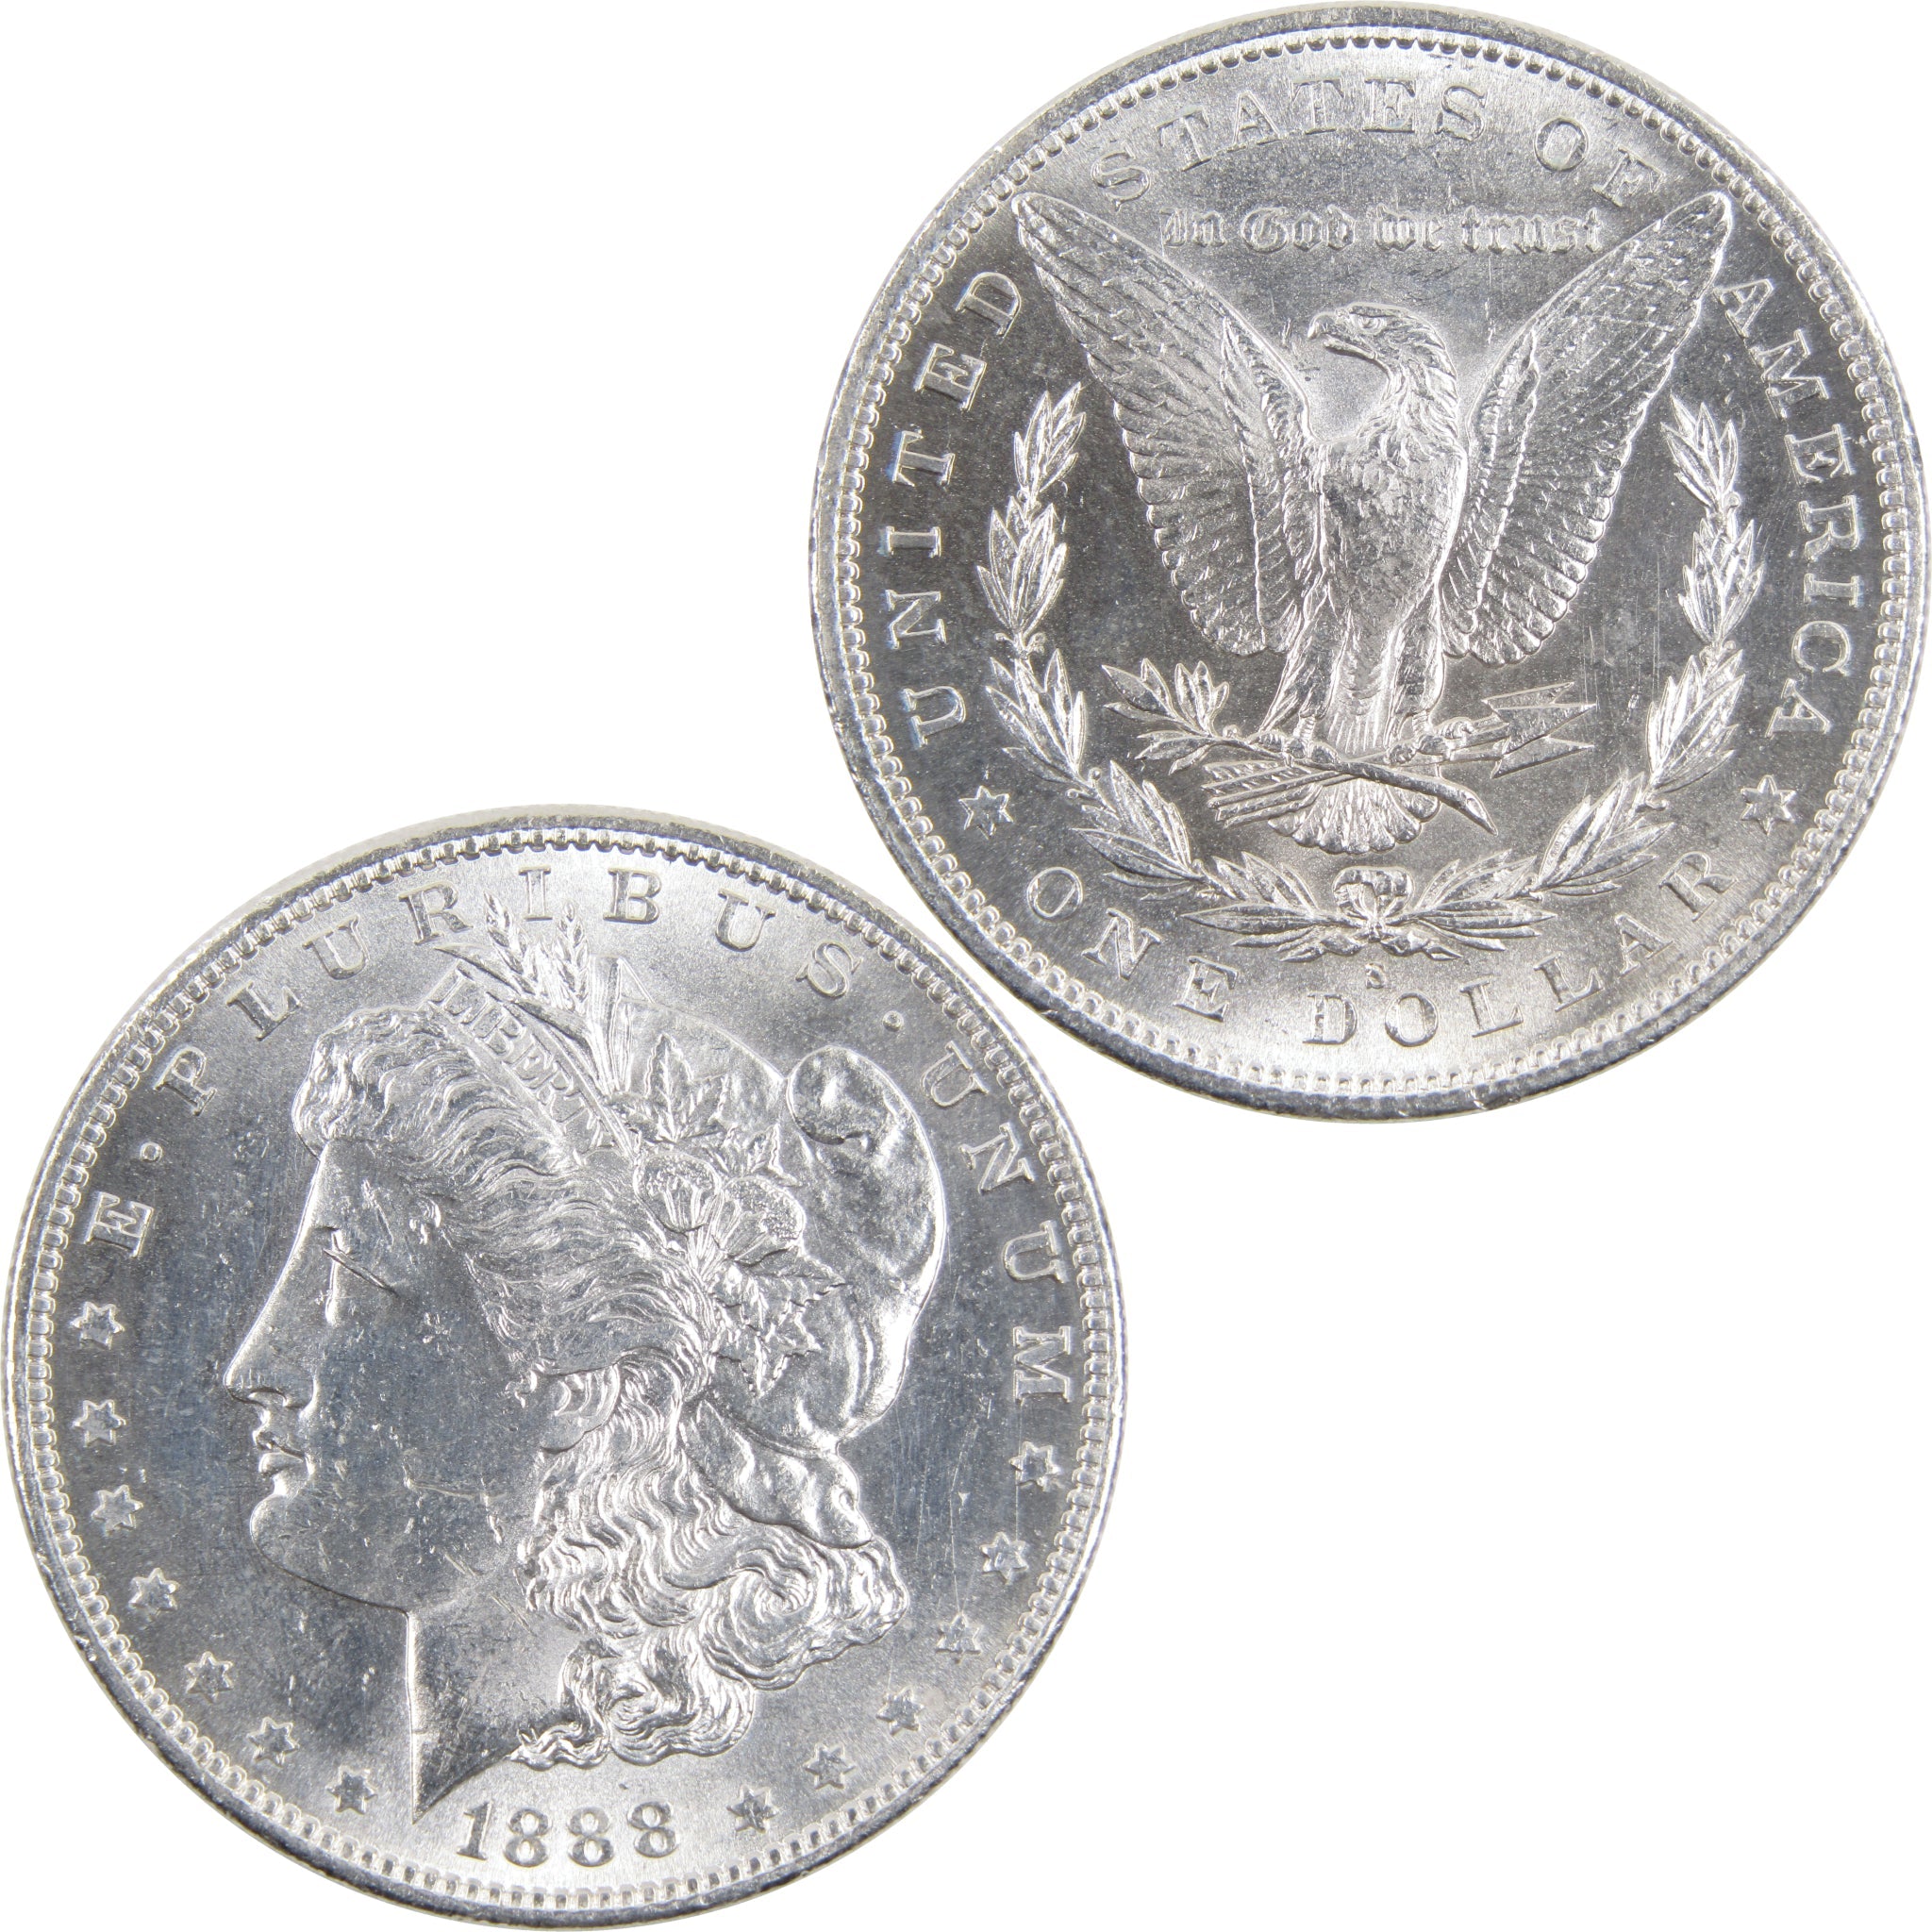 1888 S Morgan Dollar BU Uncirculated Mint State 90% Silver SKU:I2429 - Morgan coin - Morgan silver dollar - Morgan silver dollar for sale - Profile Coins &amp; Collectibles